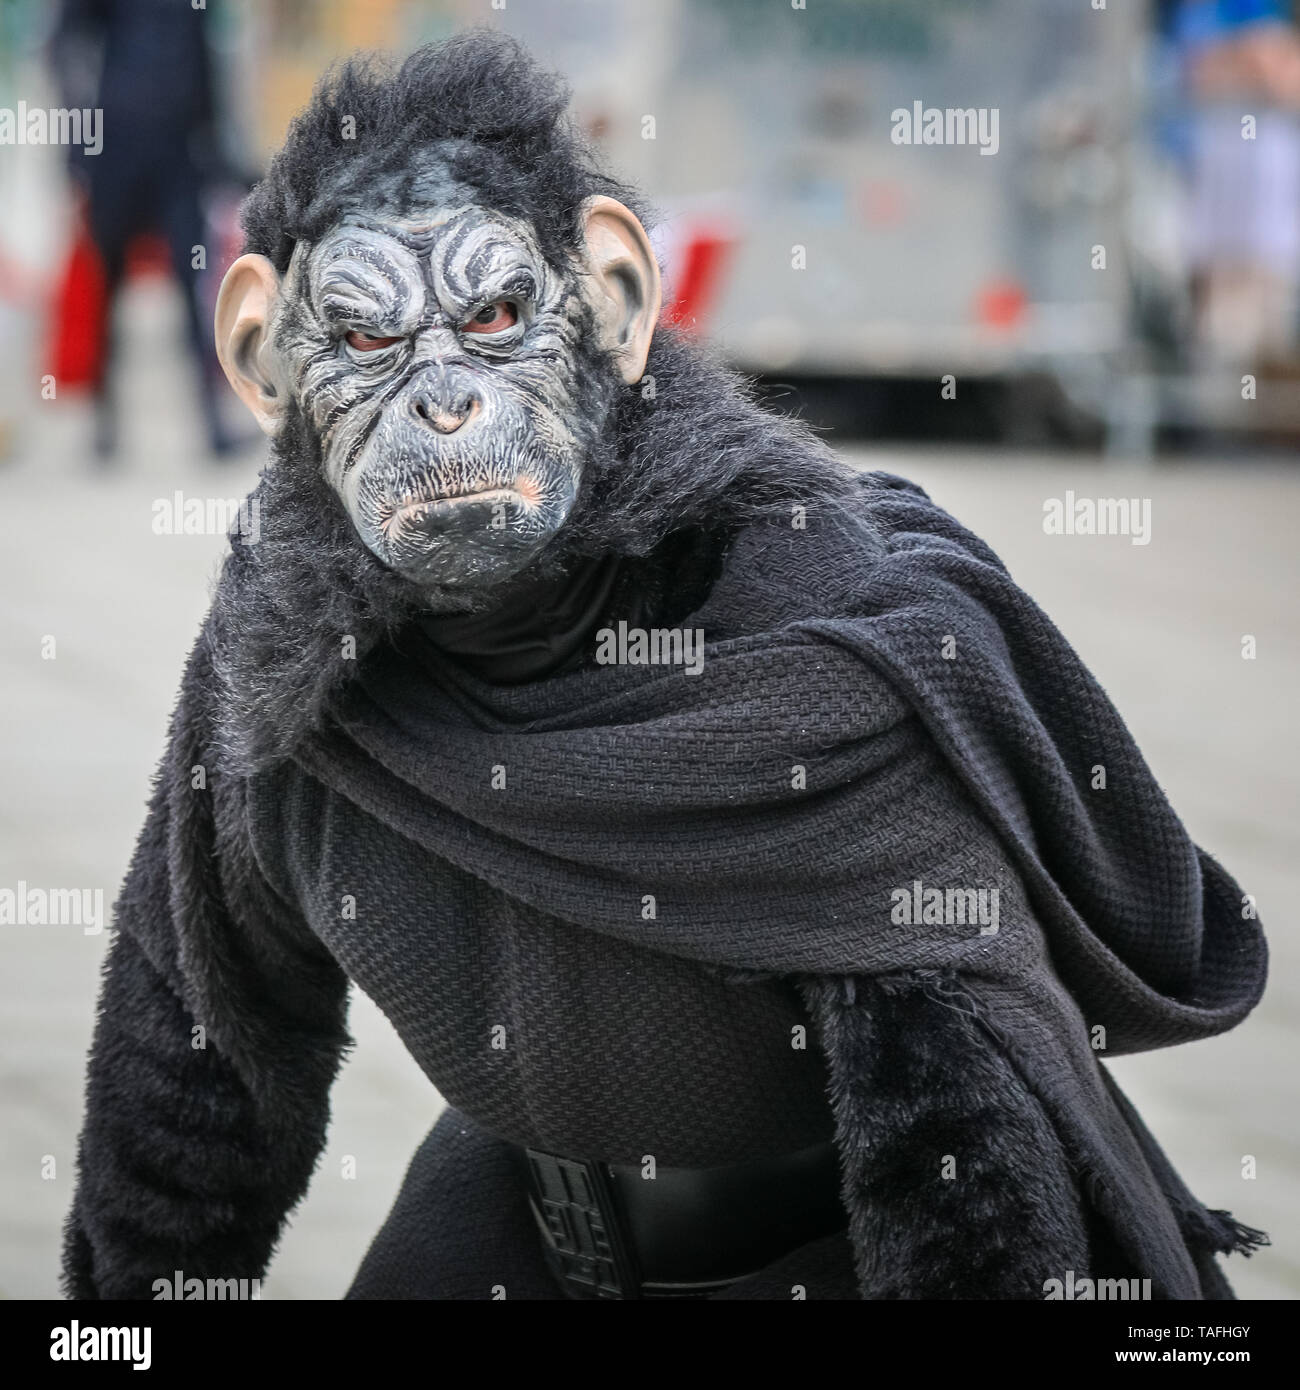 ExCel London, UK - 24th May 2019. Planet of the Apes meets meets Kylo Wren from Star Wars. Thousands of cosplayers, gamers and lovers of film and TV fantasy and sci fi in costumes come together on the opening day of MCM Comicon at ExCel London. Credit: Imageplotter/Alamy Live News Stock Photo